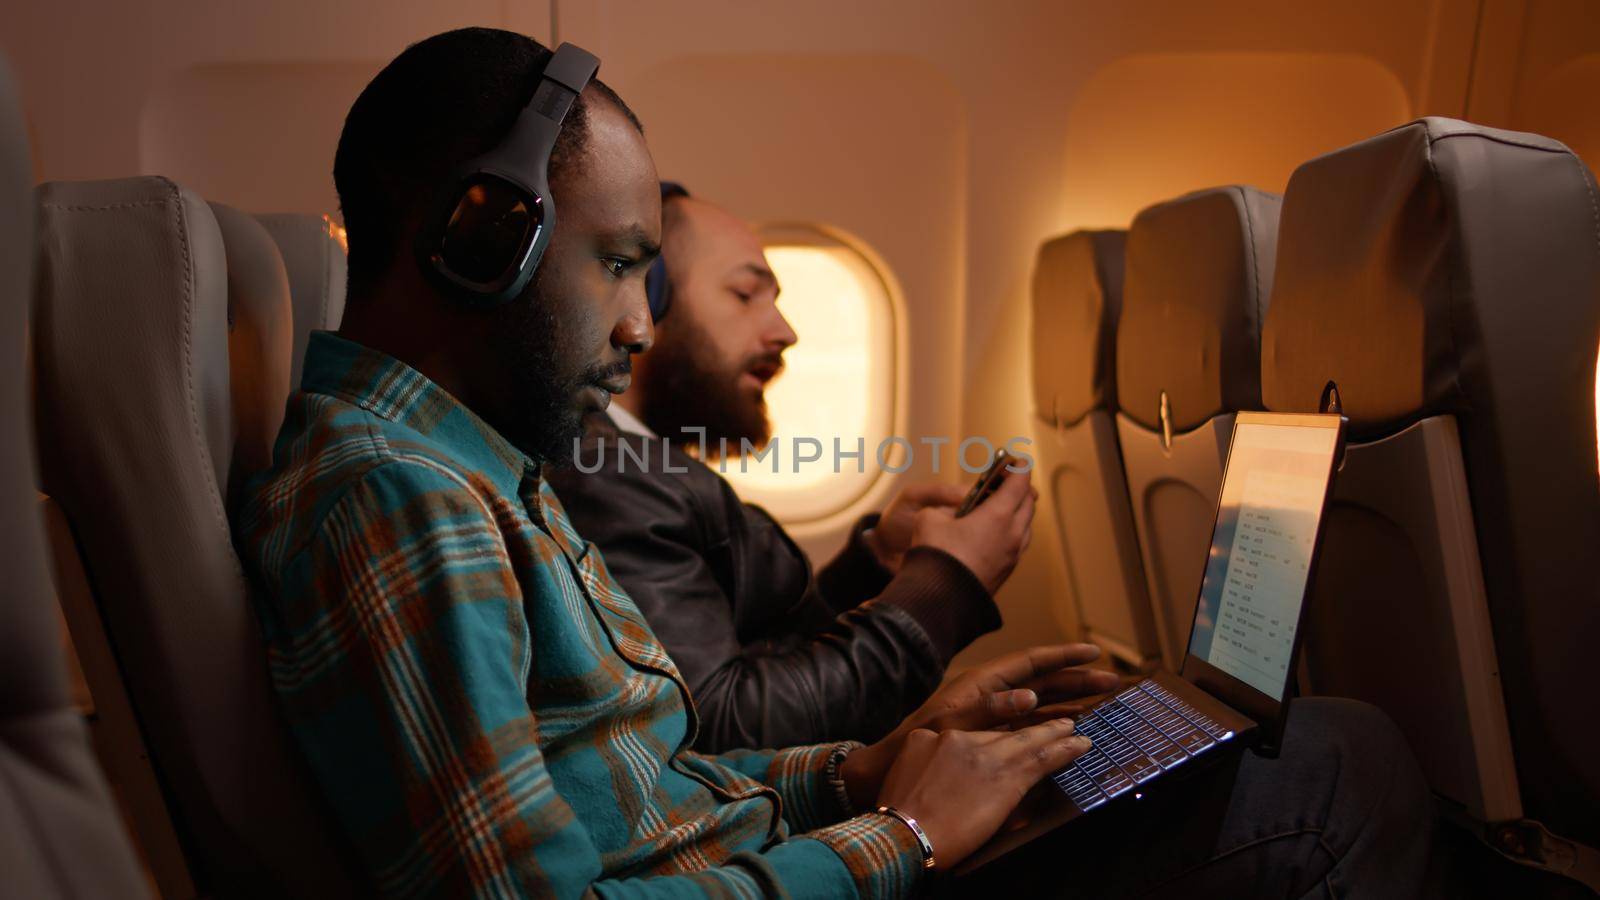 African american freelancer using laptop on flight, travelling on work trip during sunset in economy class. Working on computer and flying on airplane, aviation journey.